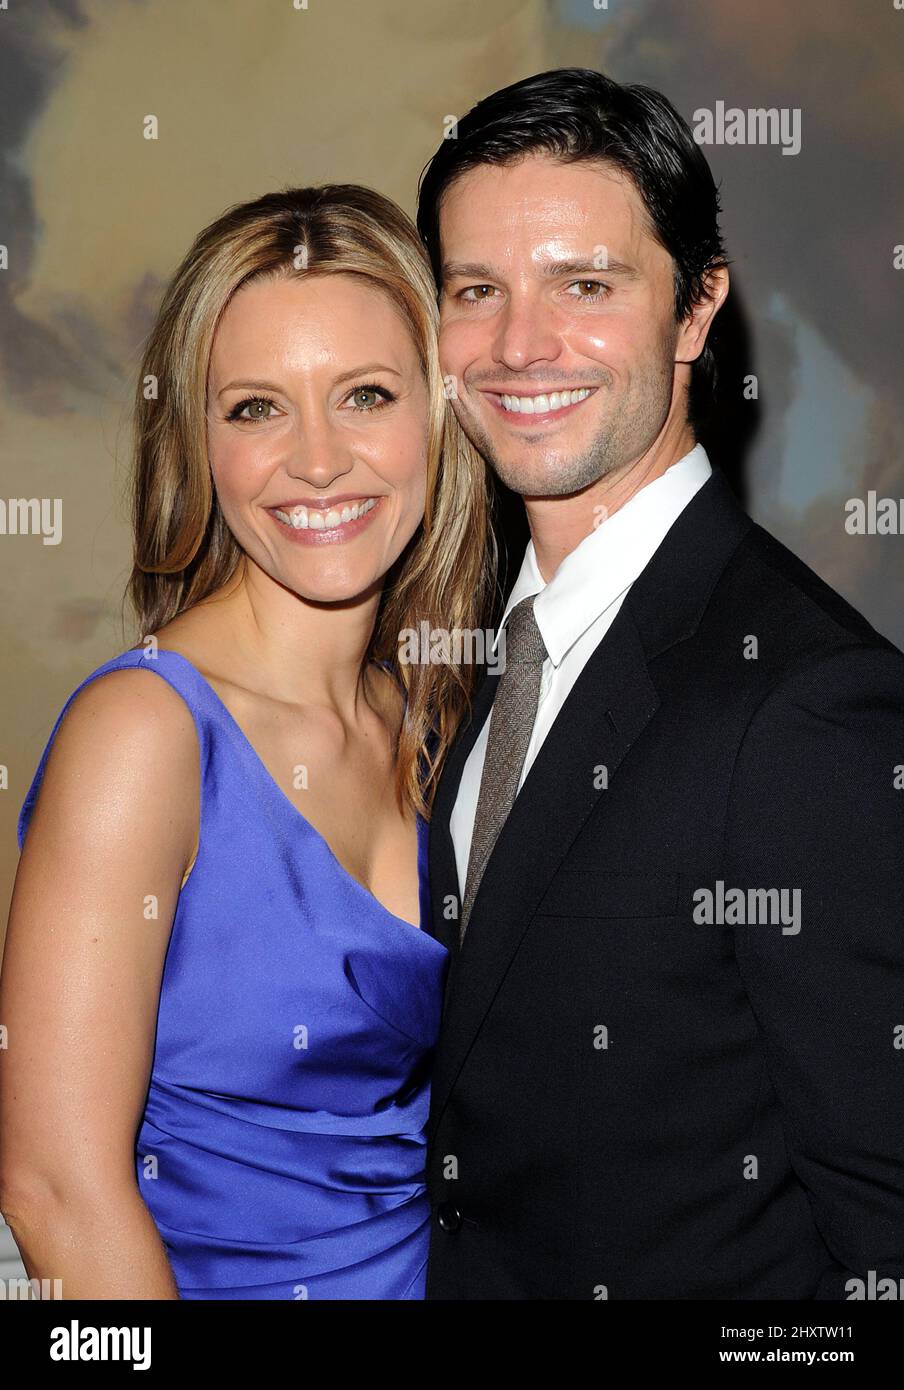 KaDee Strickland and Jason Behr at the 2011 PRISM Awards held at Beverly Hills Hotel, California. Stock Photo